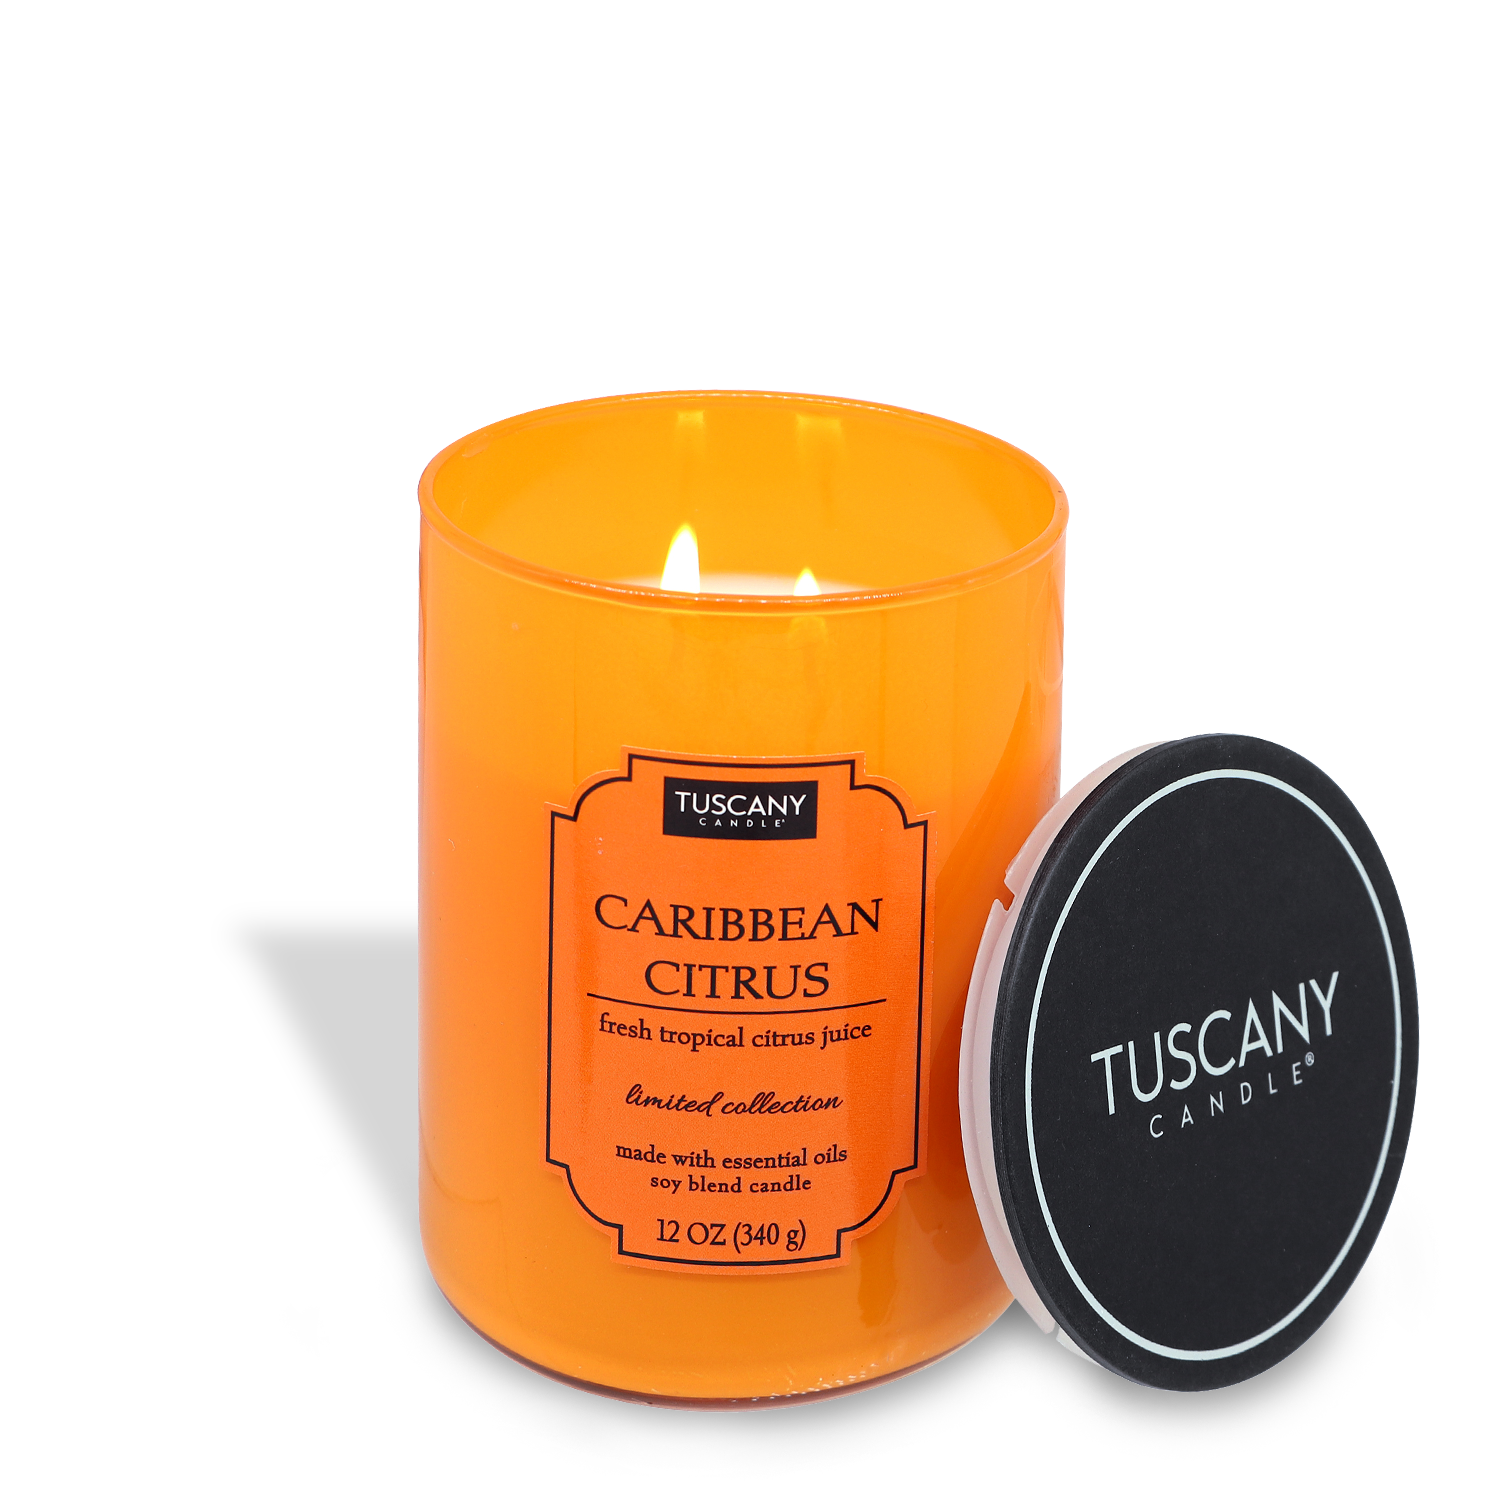 A Tuscany Candle® EVD Caribbean Citrus (12 oz) candle with a tropical citrus juice scent, housed in an orange glass container with its black lid positioned to the side.